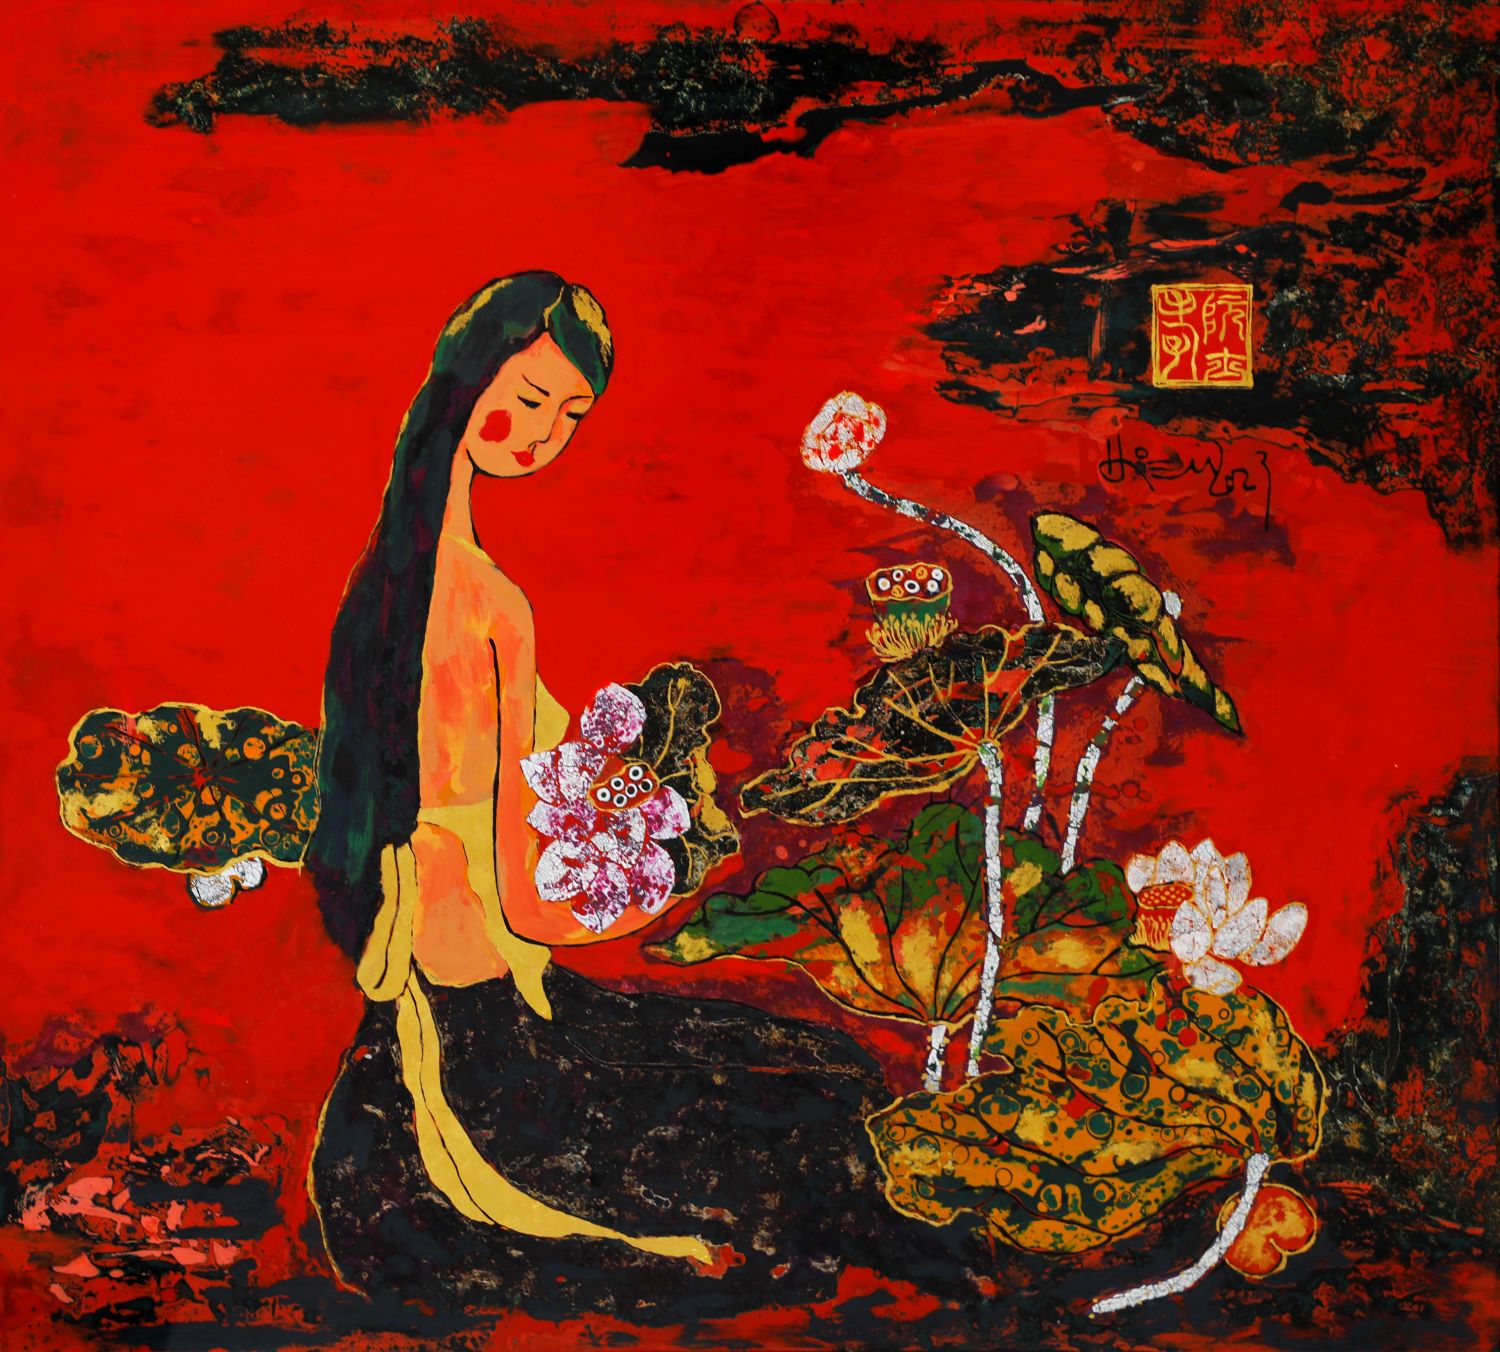 Adolescent Girl - Vietnamese Lacquer Painting by Artist Sy Hieu